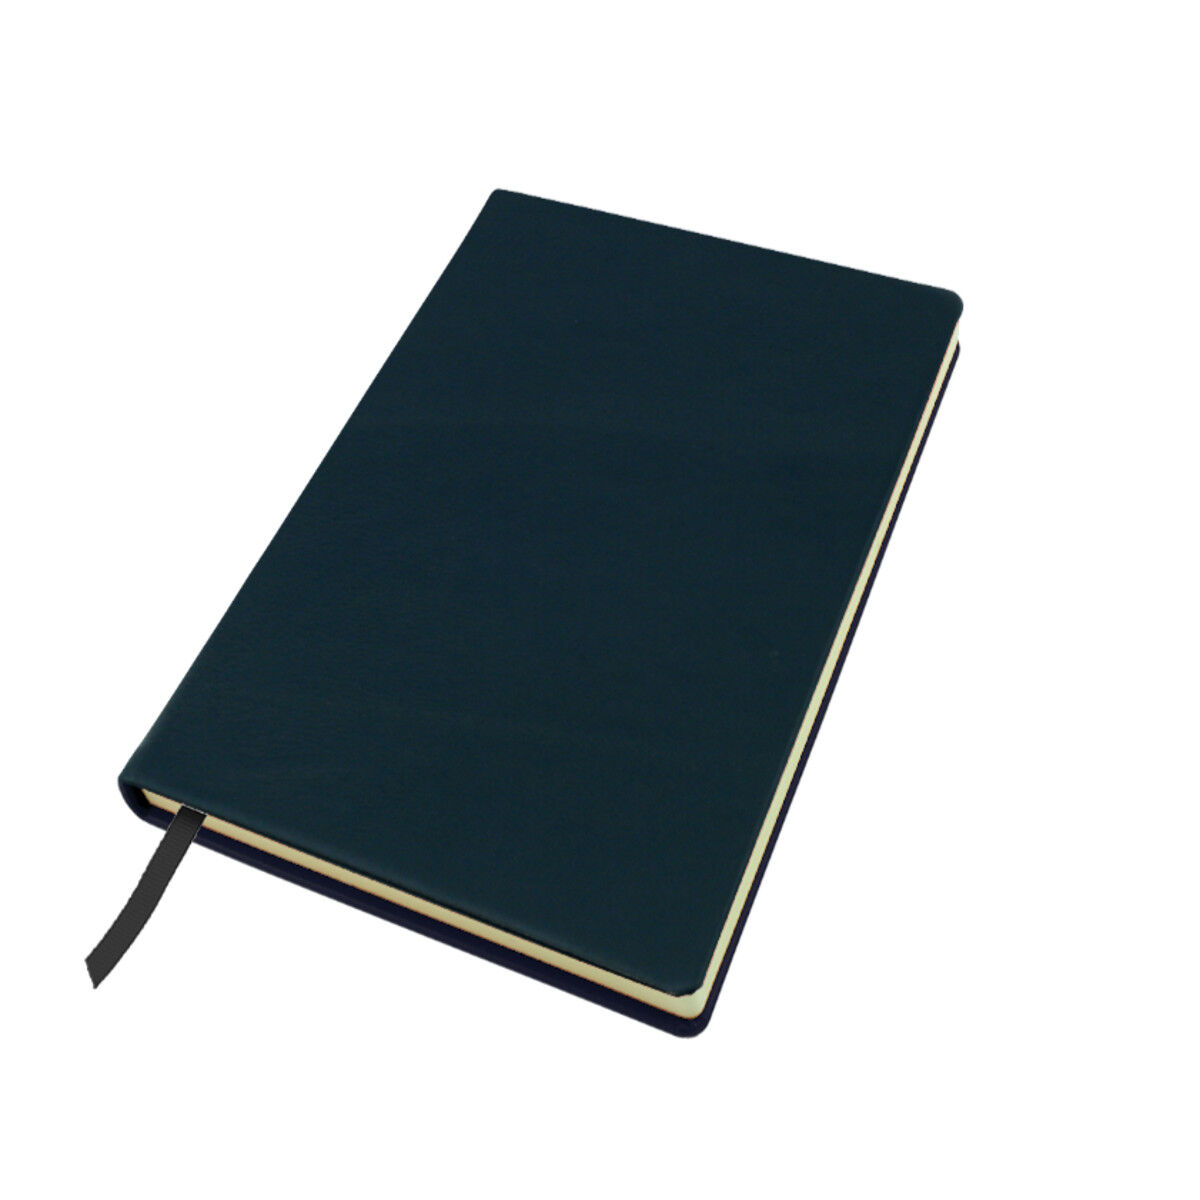 Notebook in Sandringham nappa leather (navy)